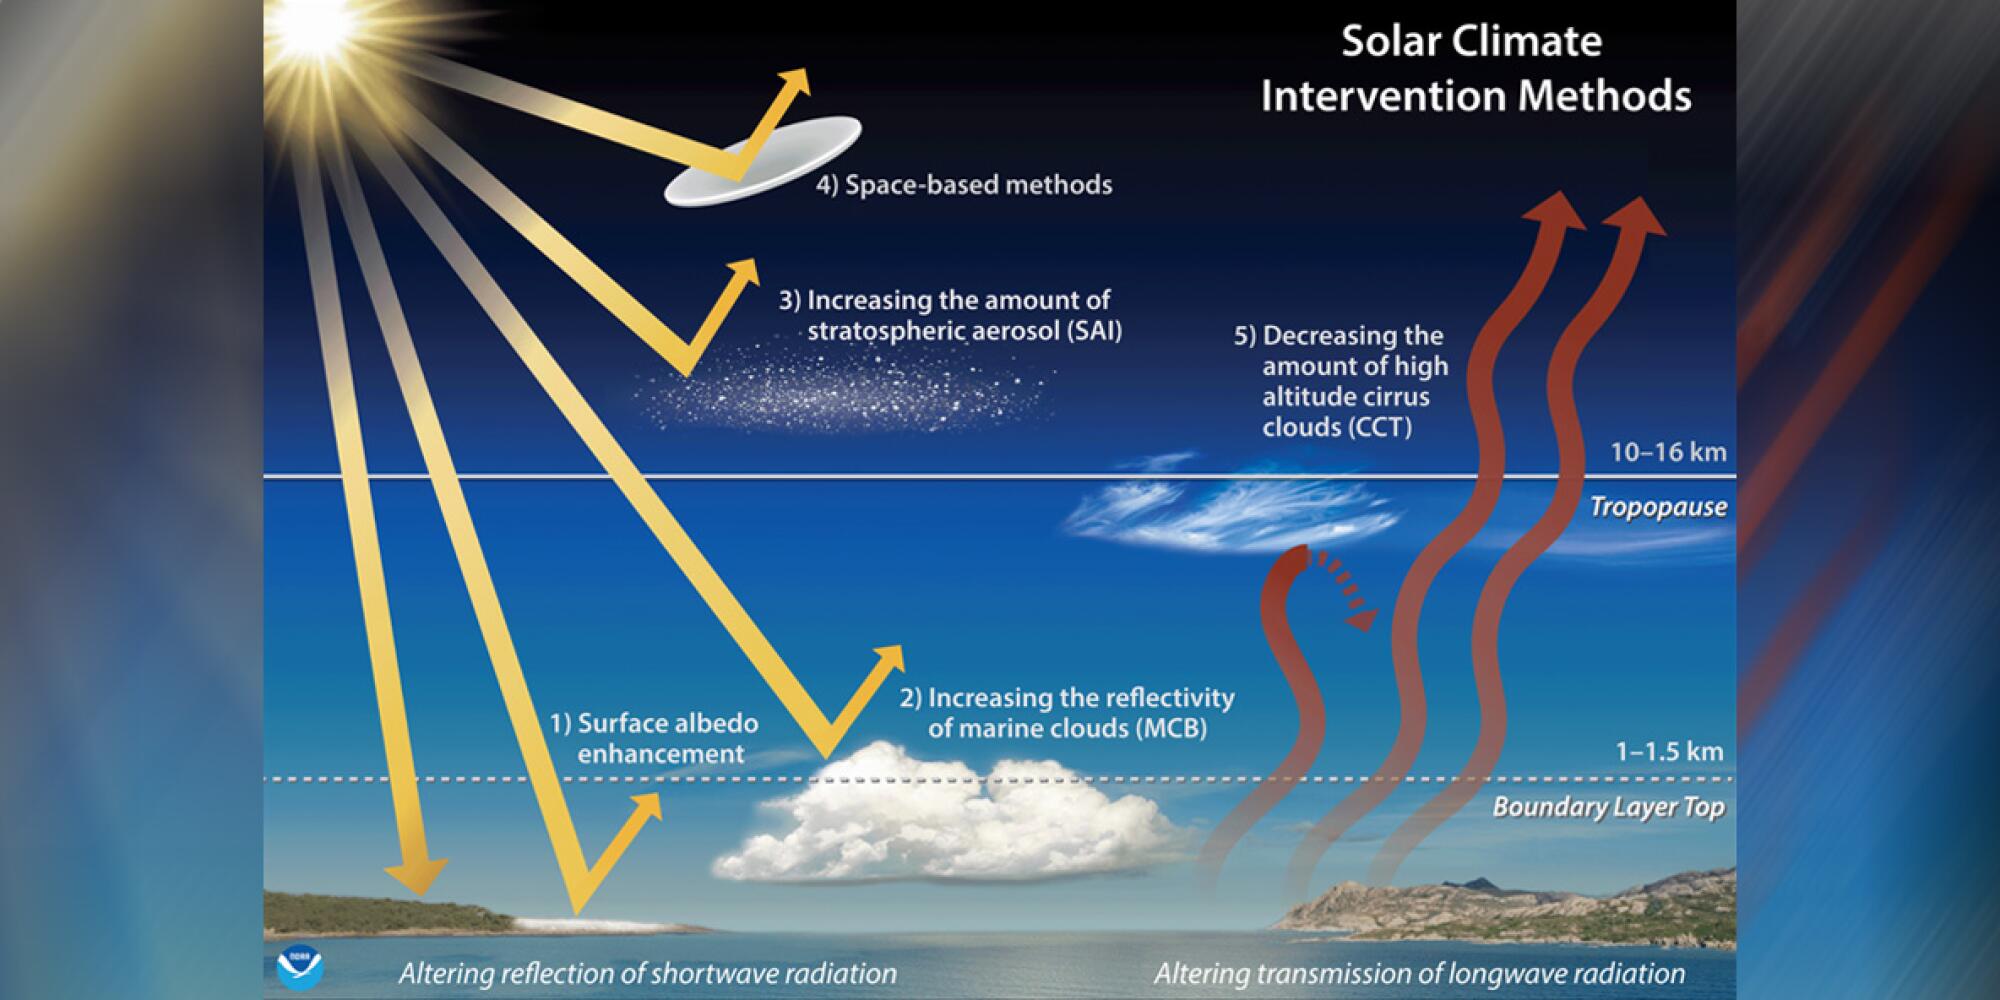 Graphic showing proposed methods for climate intervention, including modifying incoming or outgoing solar radiation